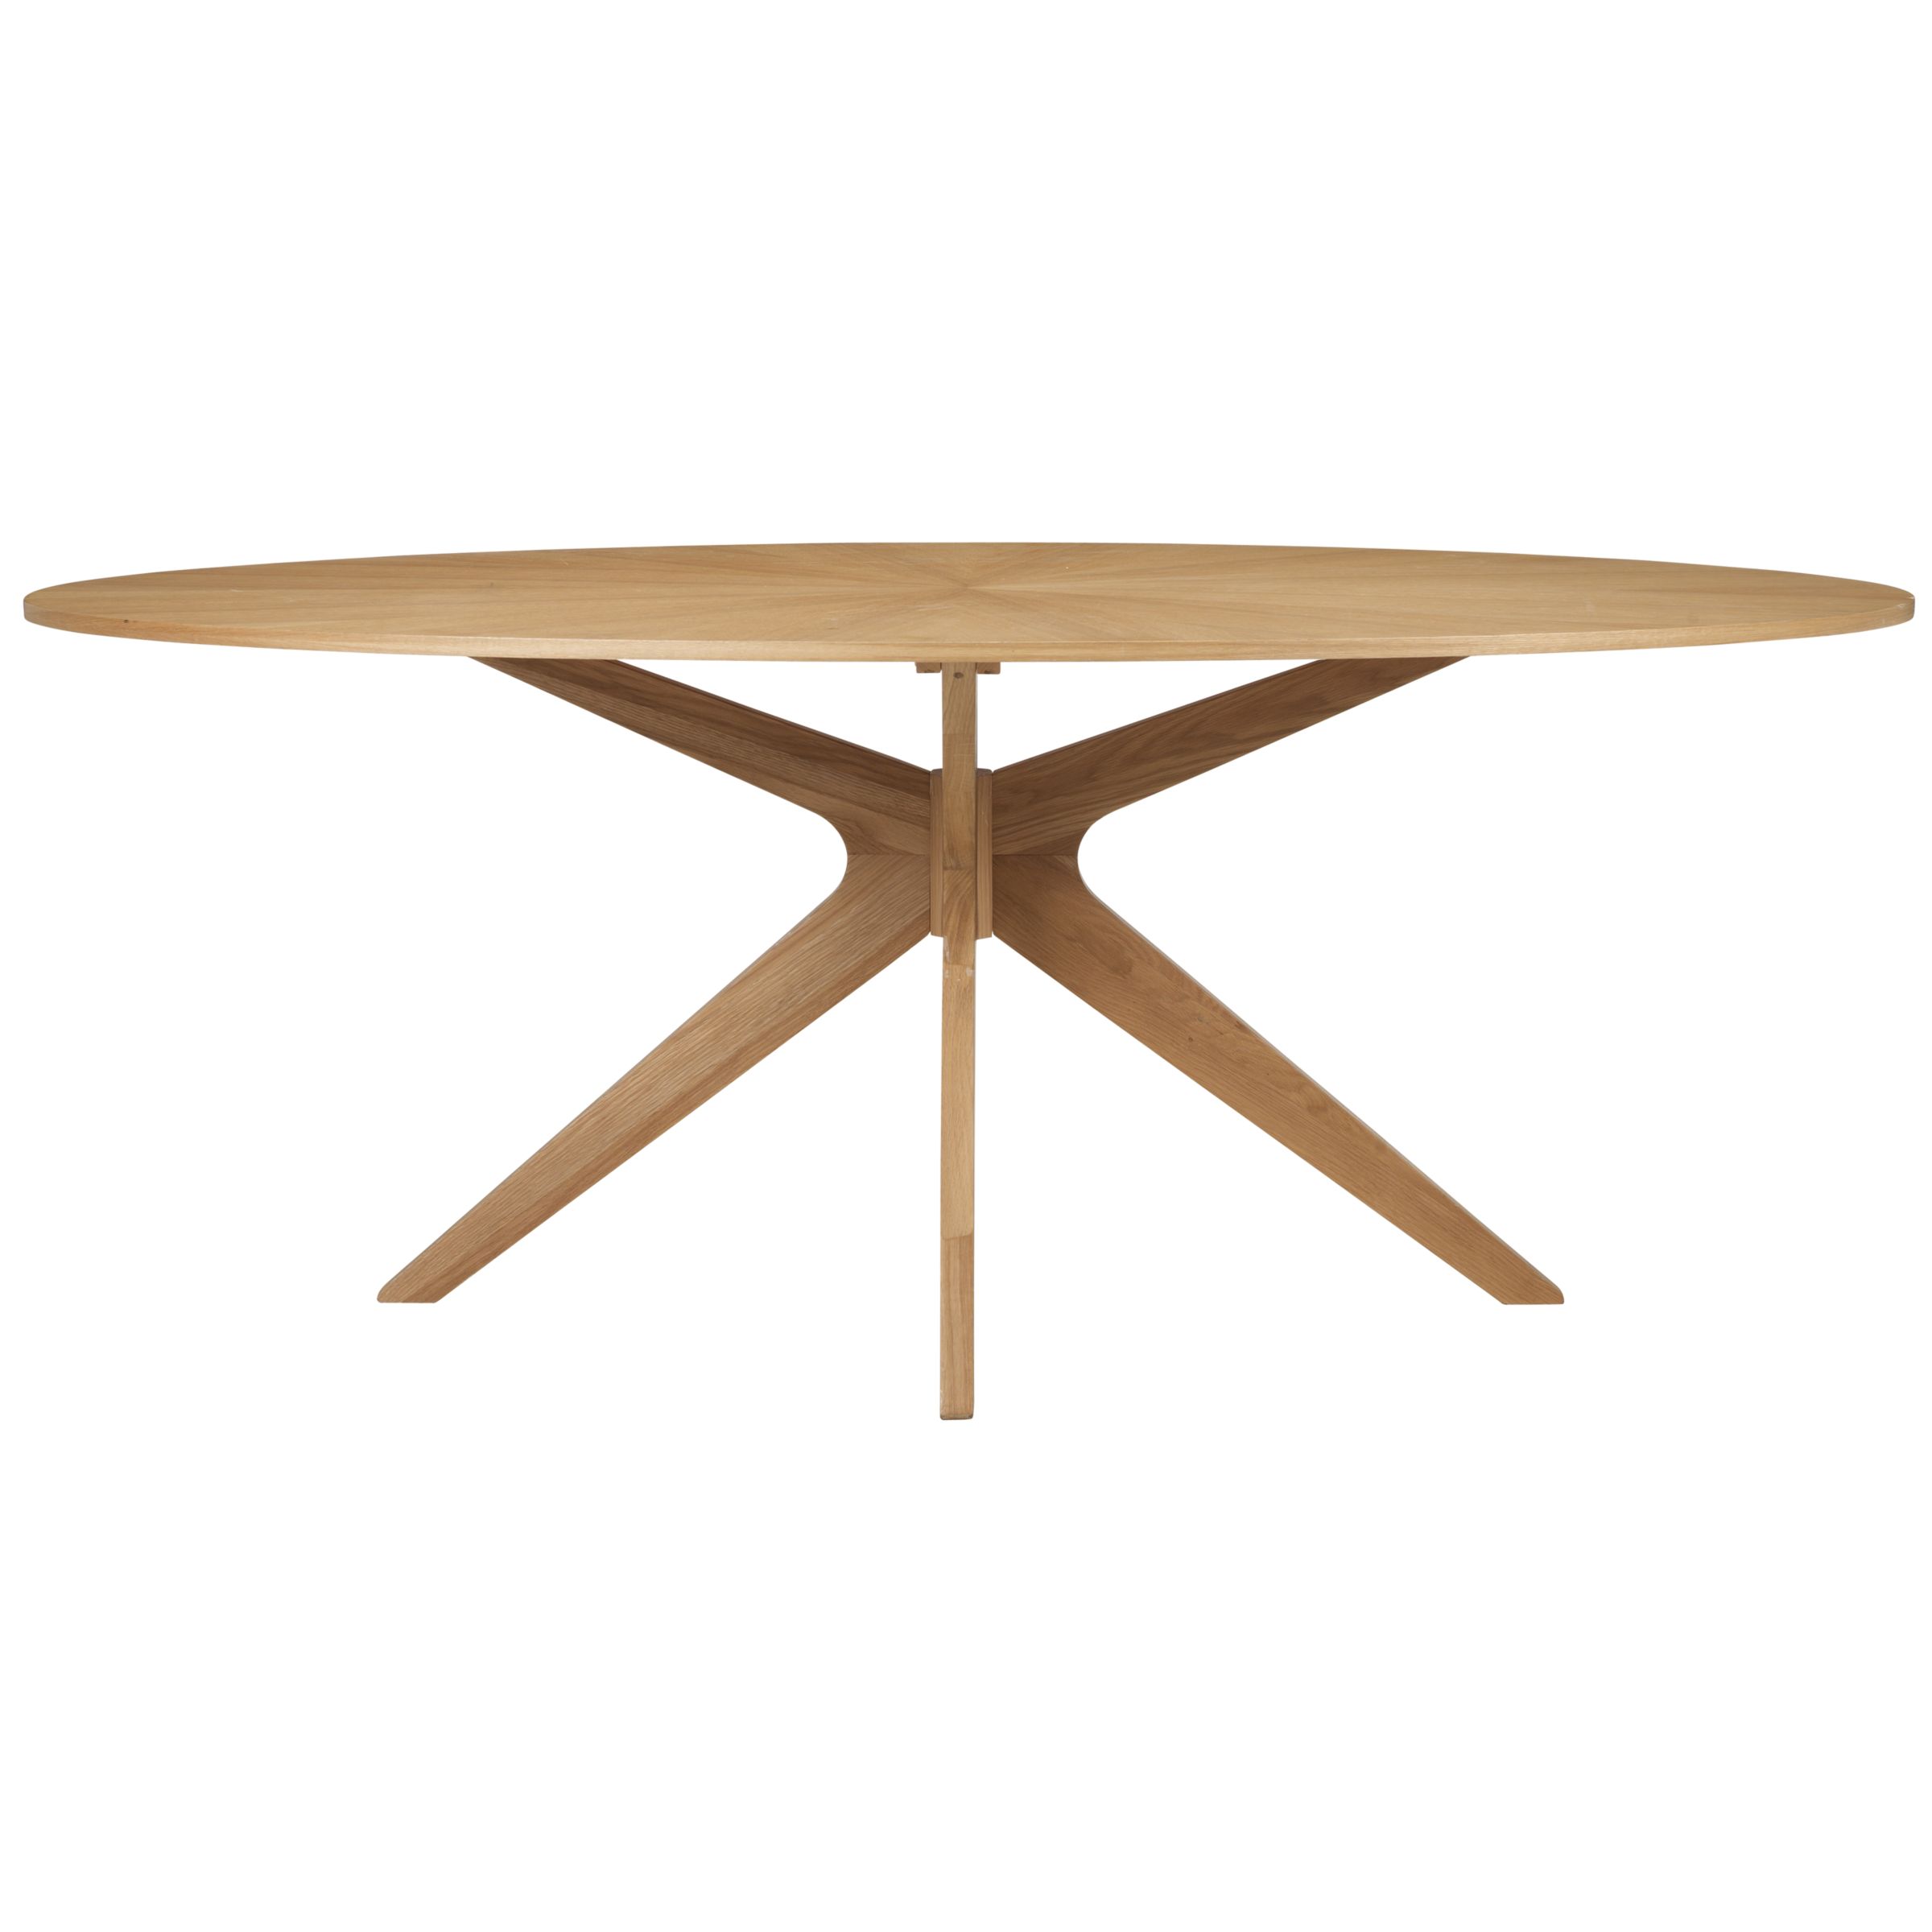 John Lewis Rigby 6 Seater Dining Table, width 190cm